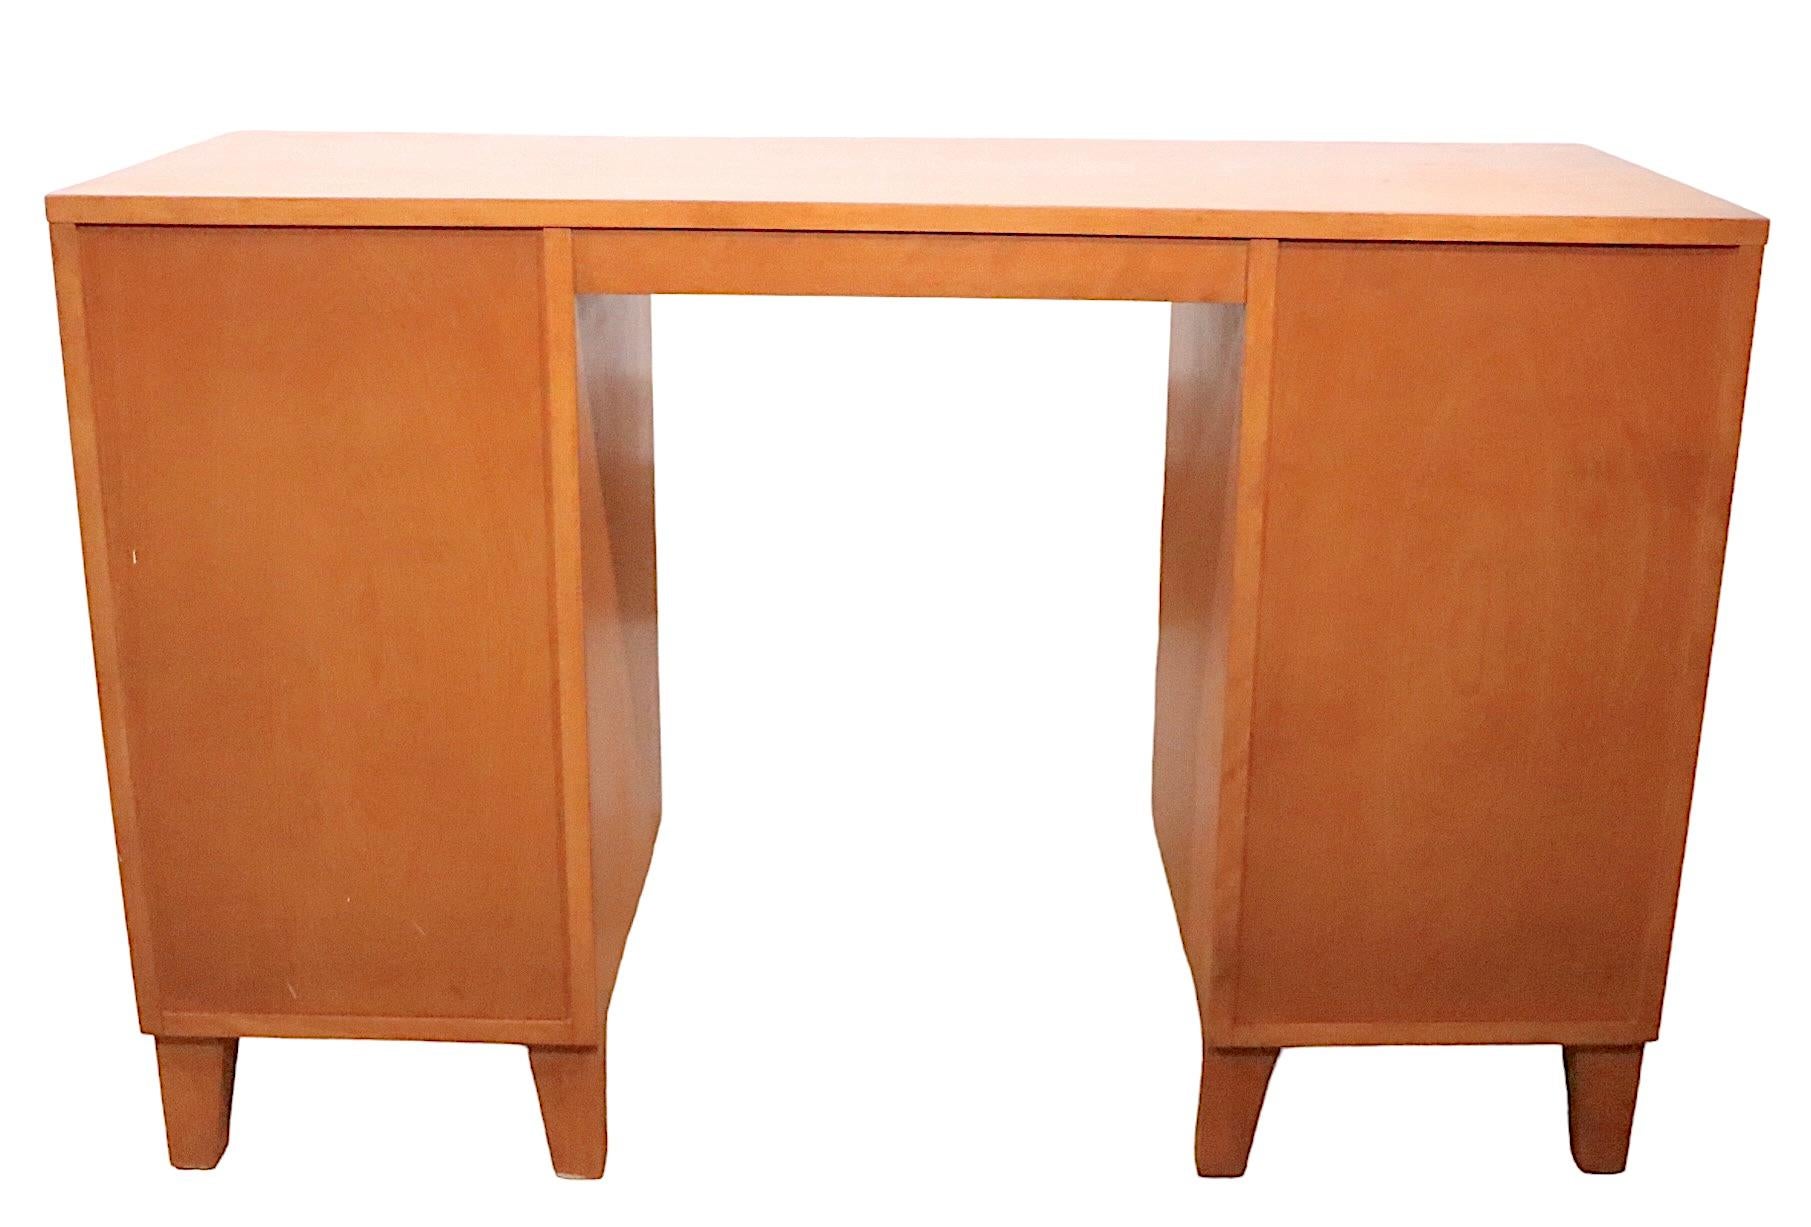 1950's Mid Century Desk and Chair Conant Ball  Modern Mates by Leslie Diamond   For Sale 1